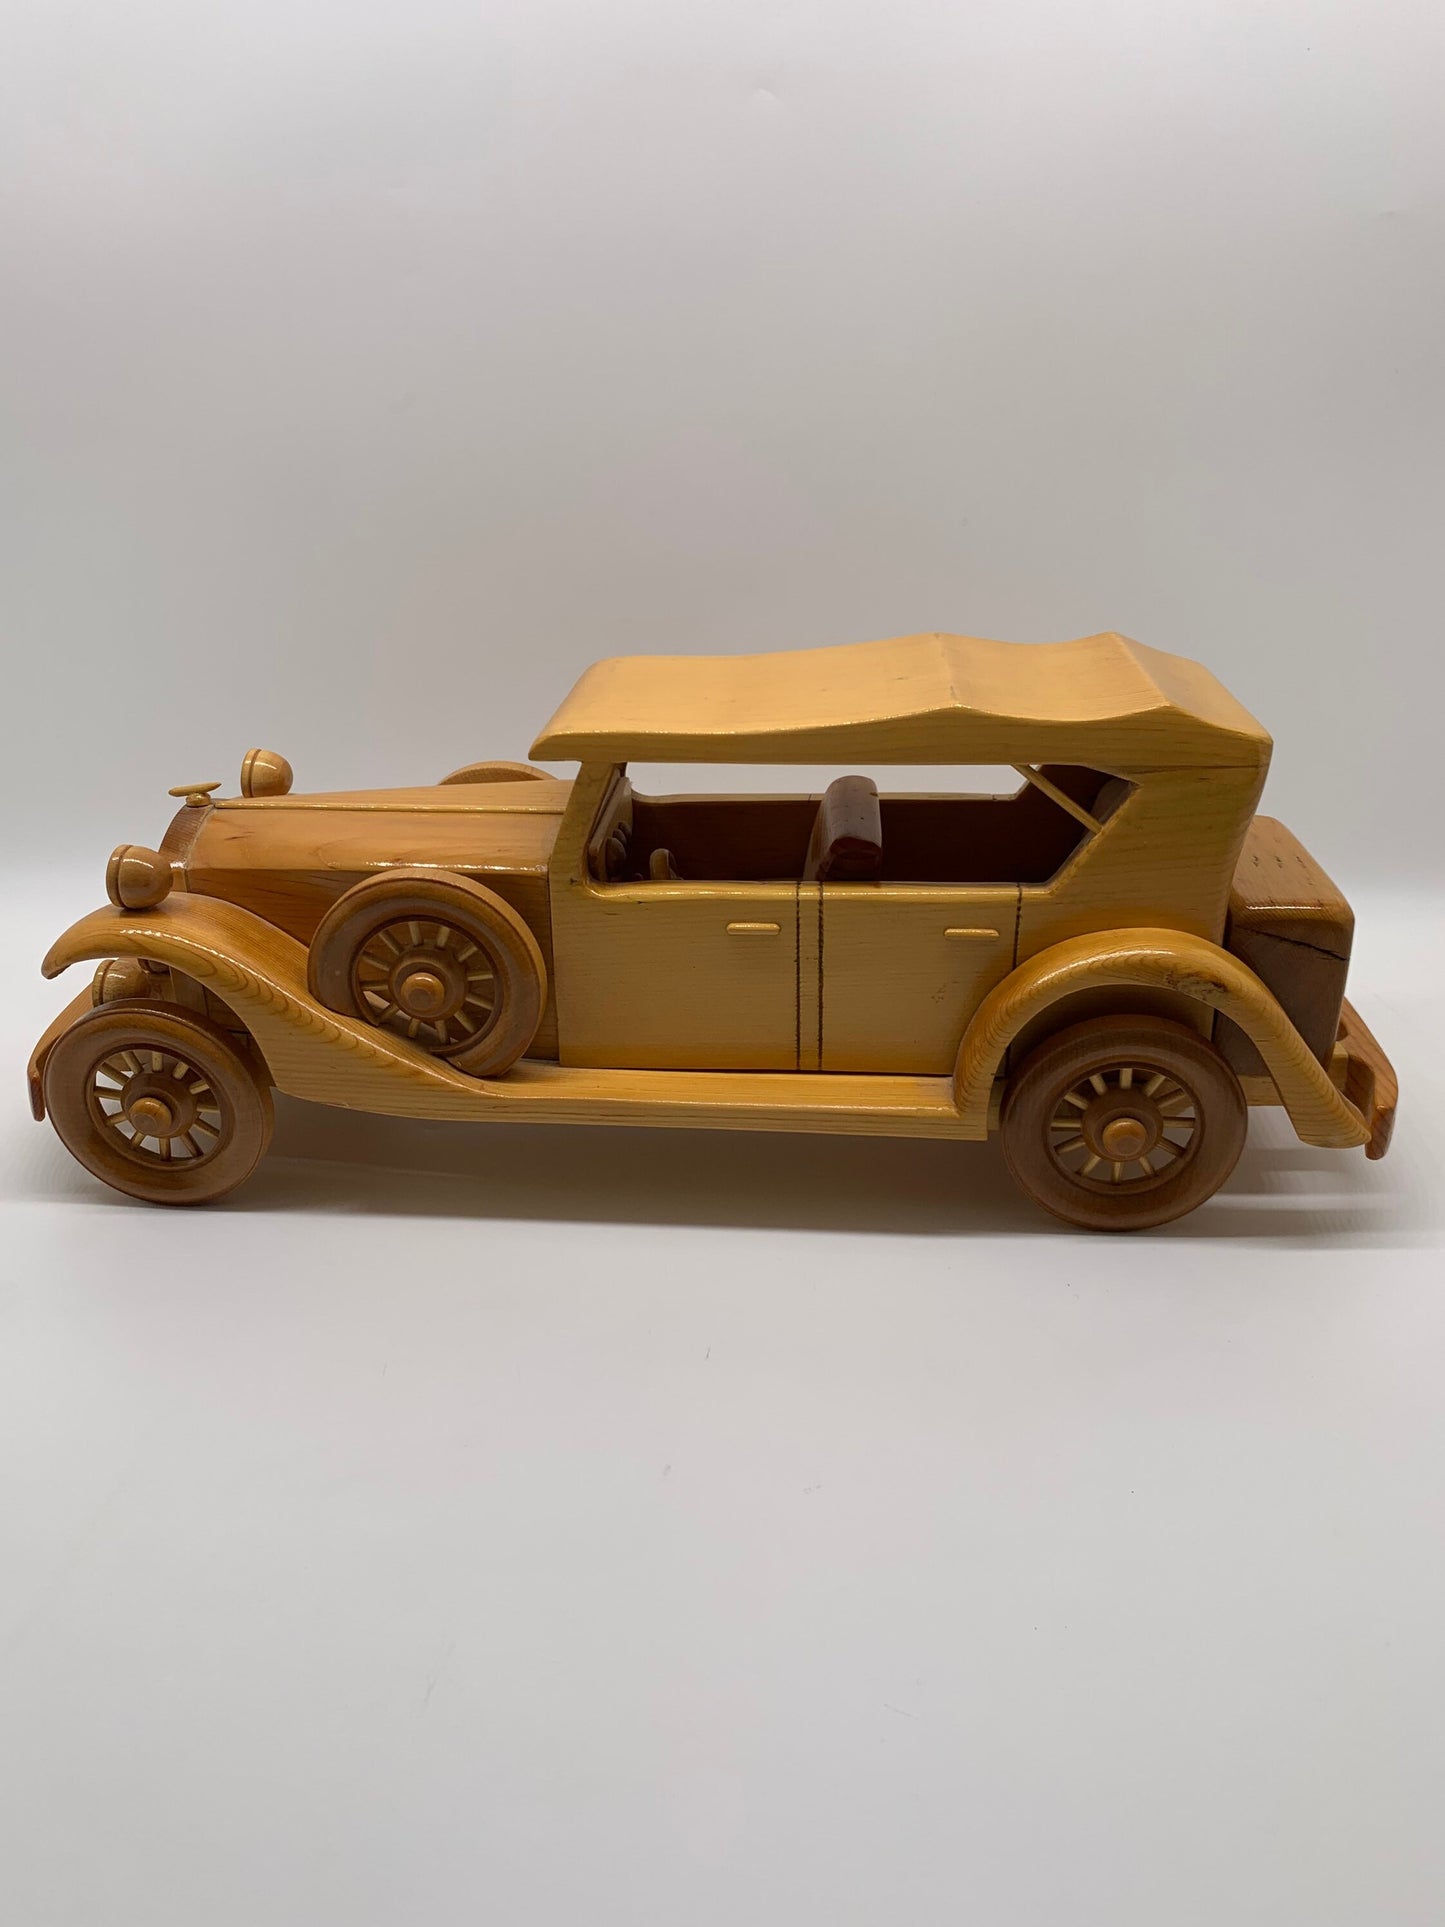 1929 Rolls Royce Phantom Wood Rare Collectable Vintage Scale Model LRC Wooden Classic Car